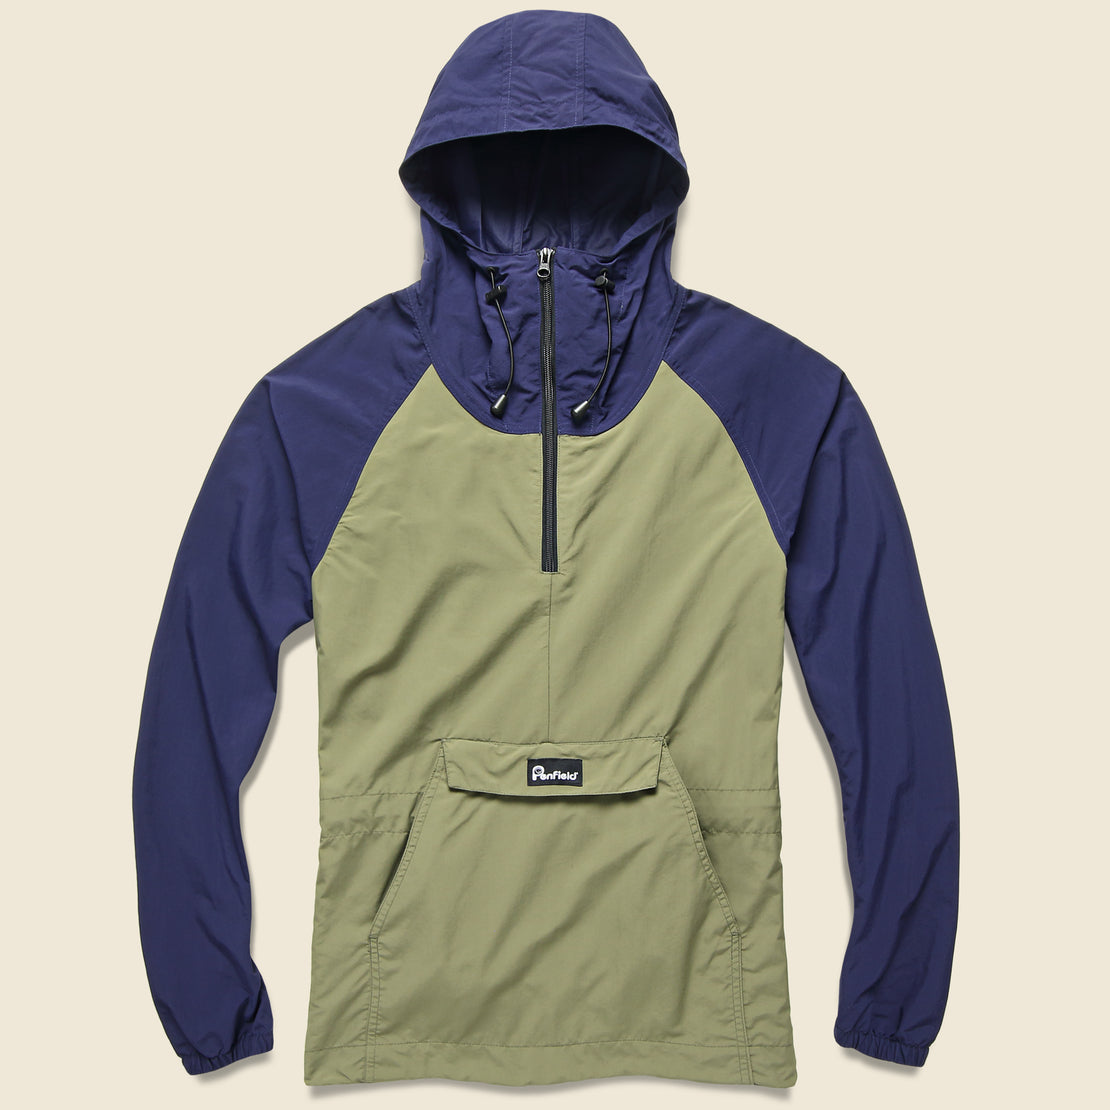 Penfield Pacjac Colorblock Jacket - Navy Olive